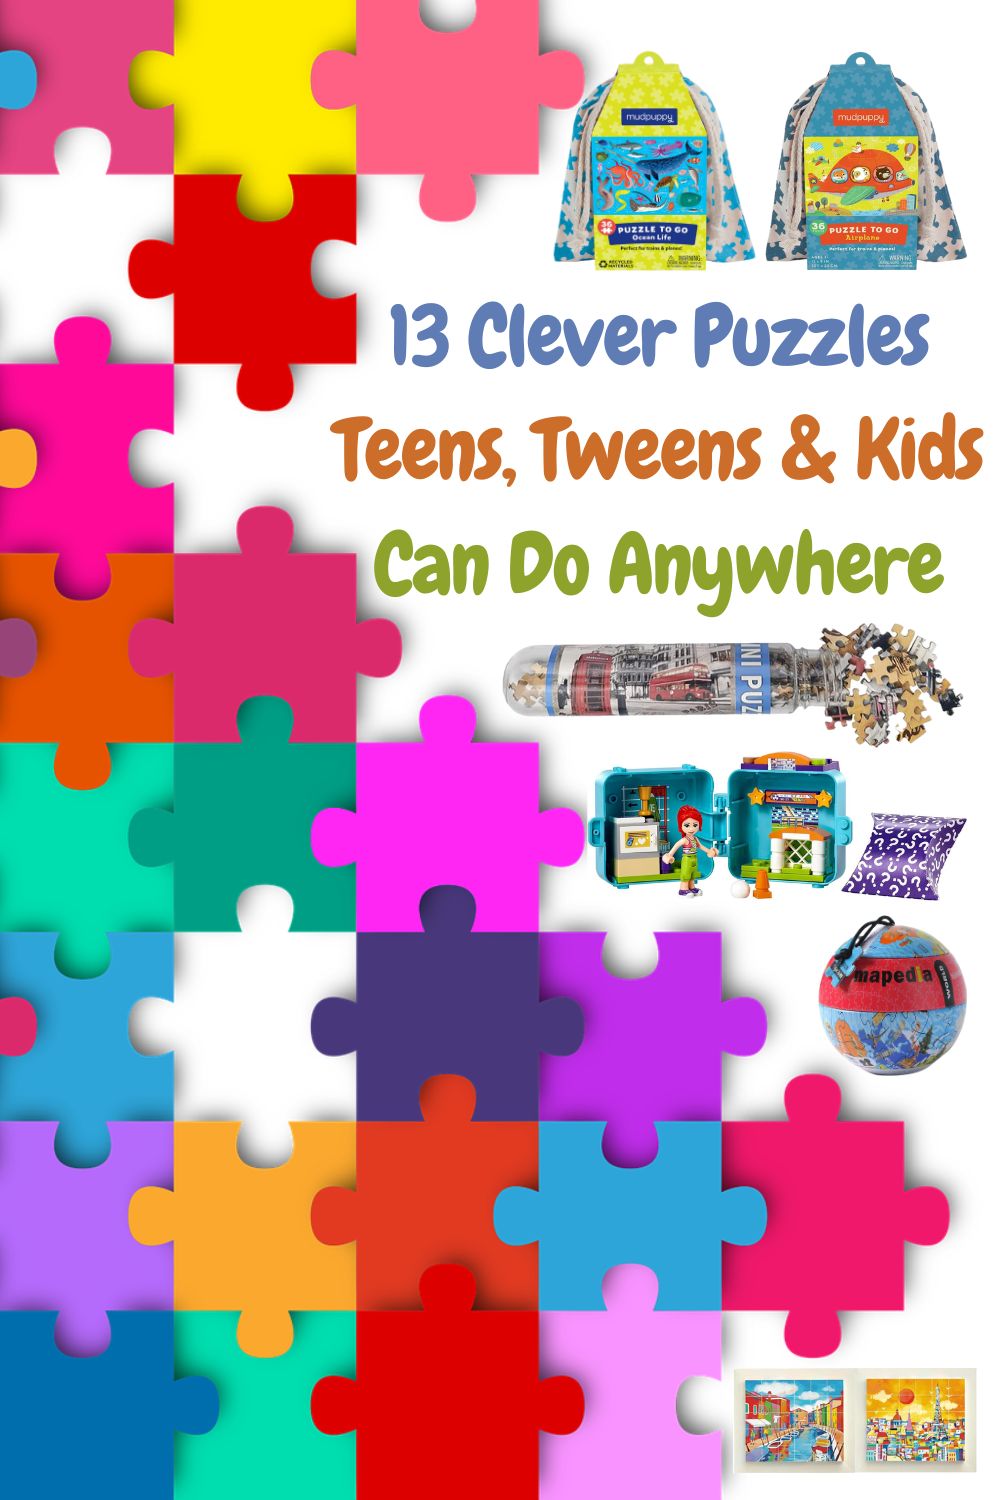 puzzles are an easy way to keep kids occupied when they need to pass the time. here are 13 engrossing travel puzzles for kids from tots to teens.